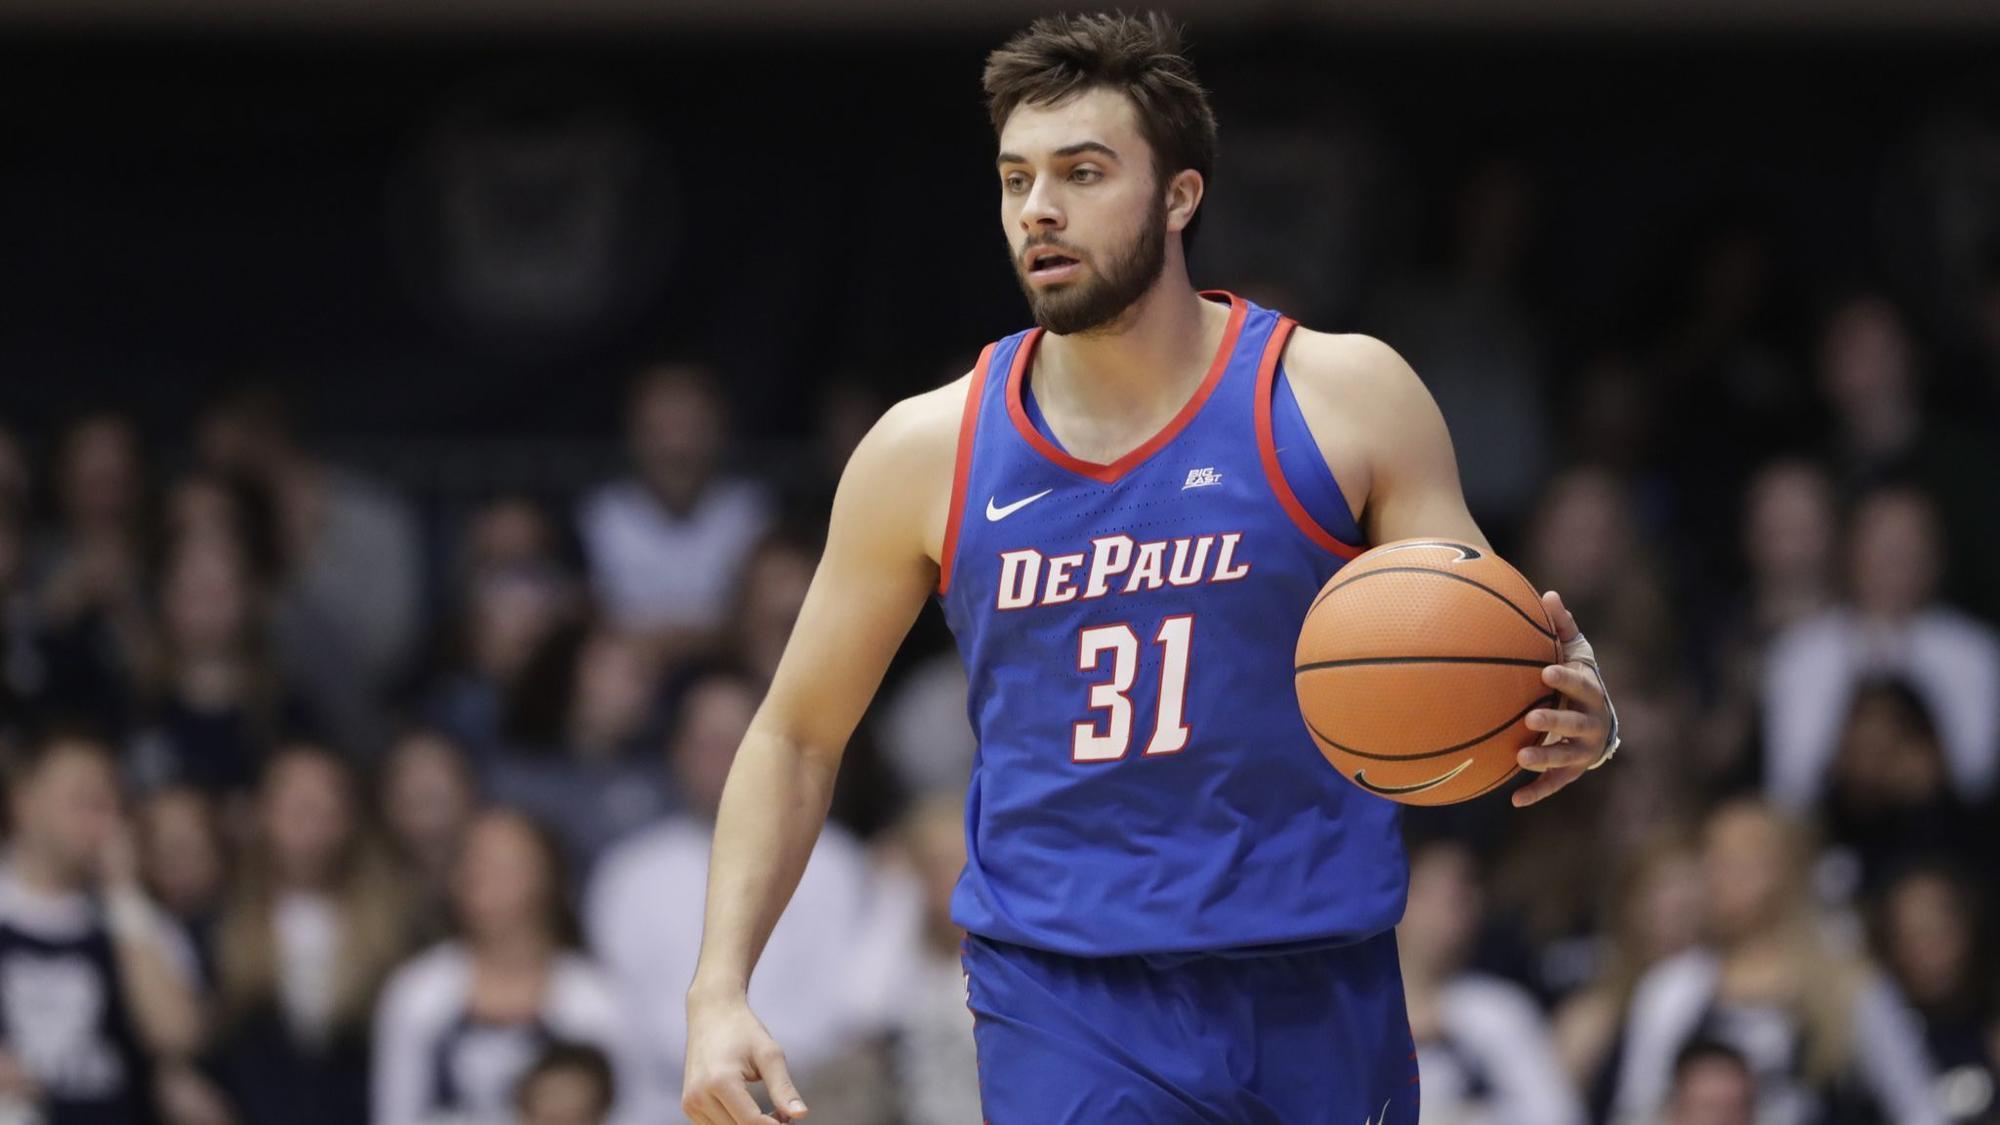 DePaul guard Max Strus to declare for NBA draft but won't hire agent - Chicago Tribune2000 x 1125